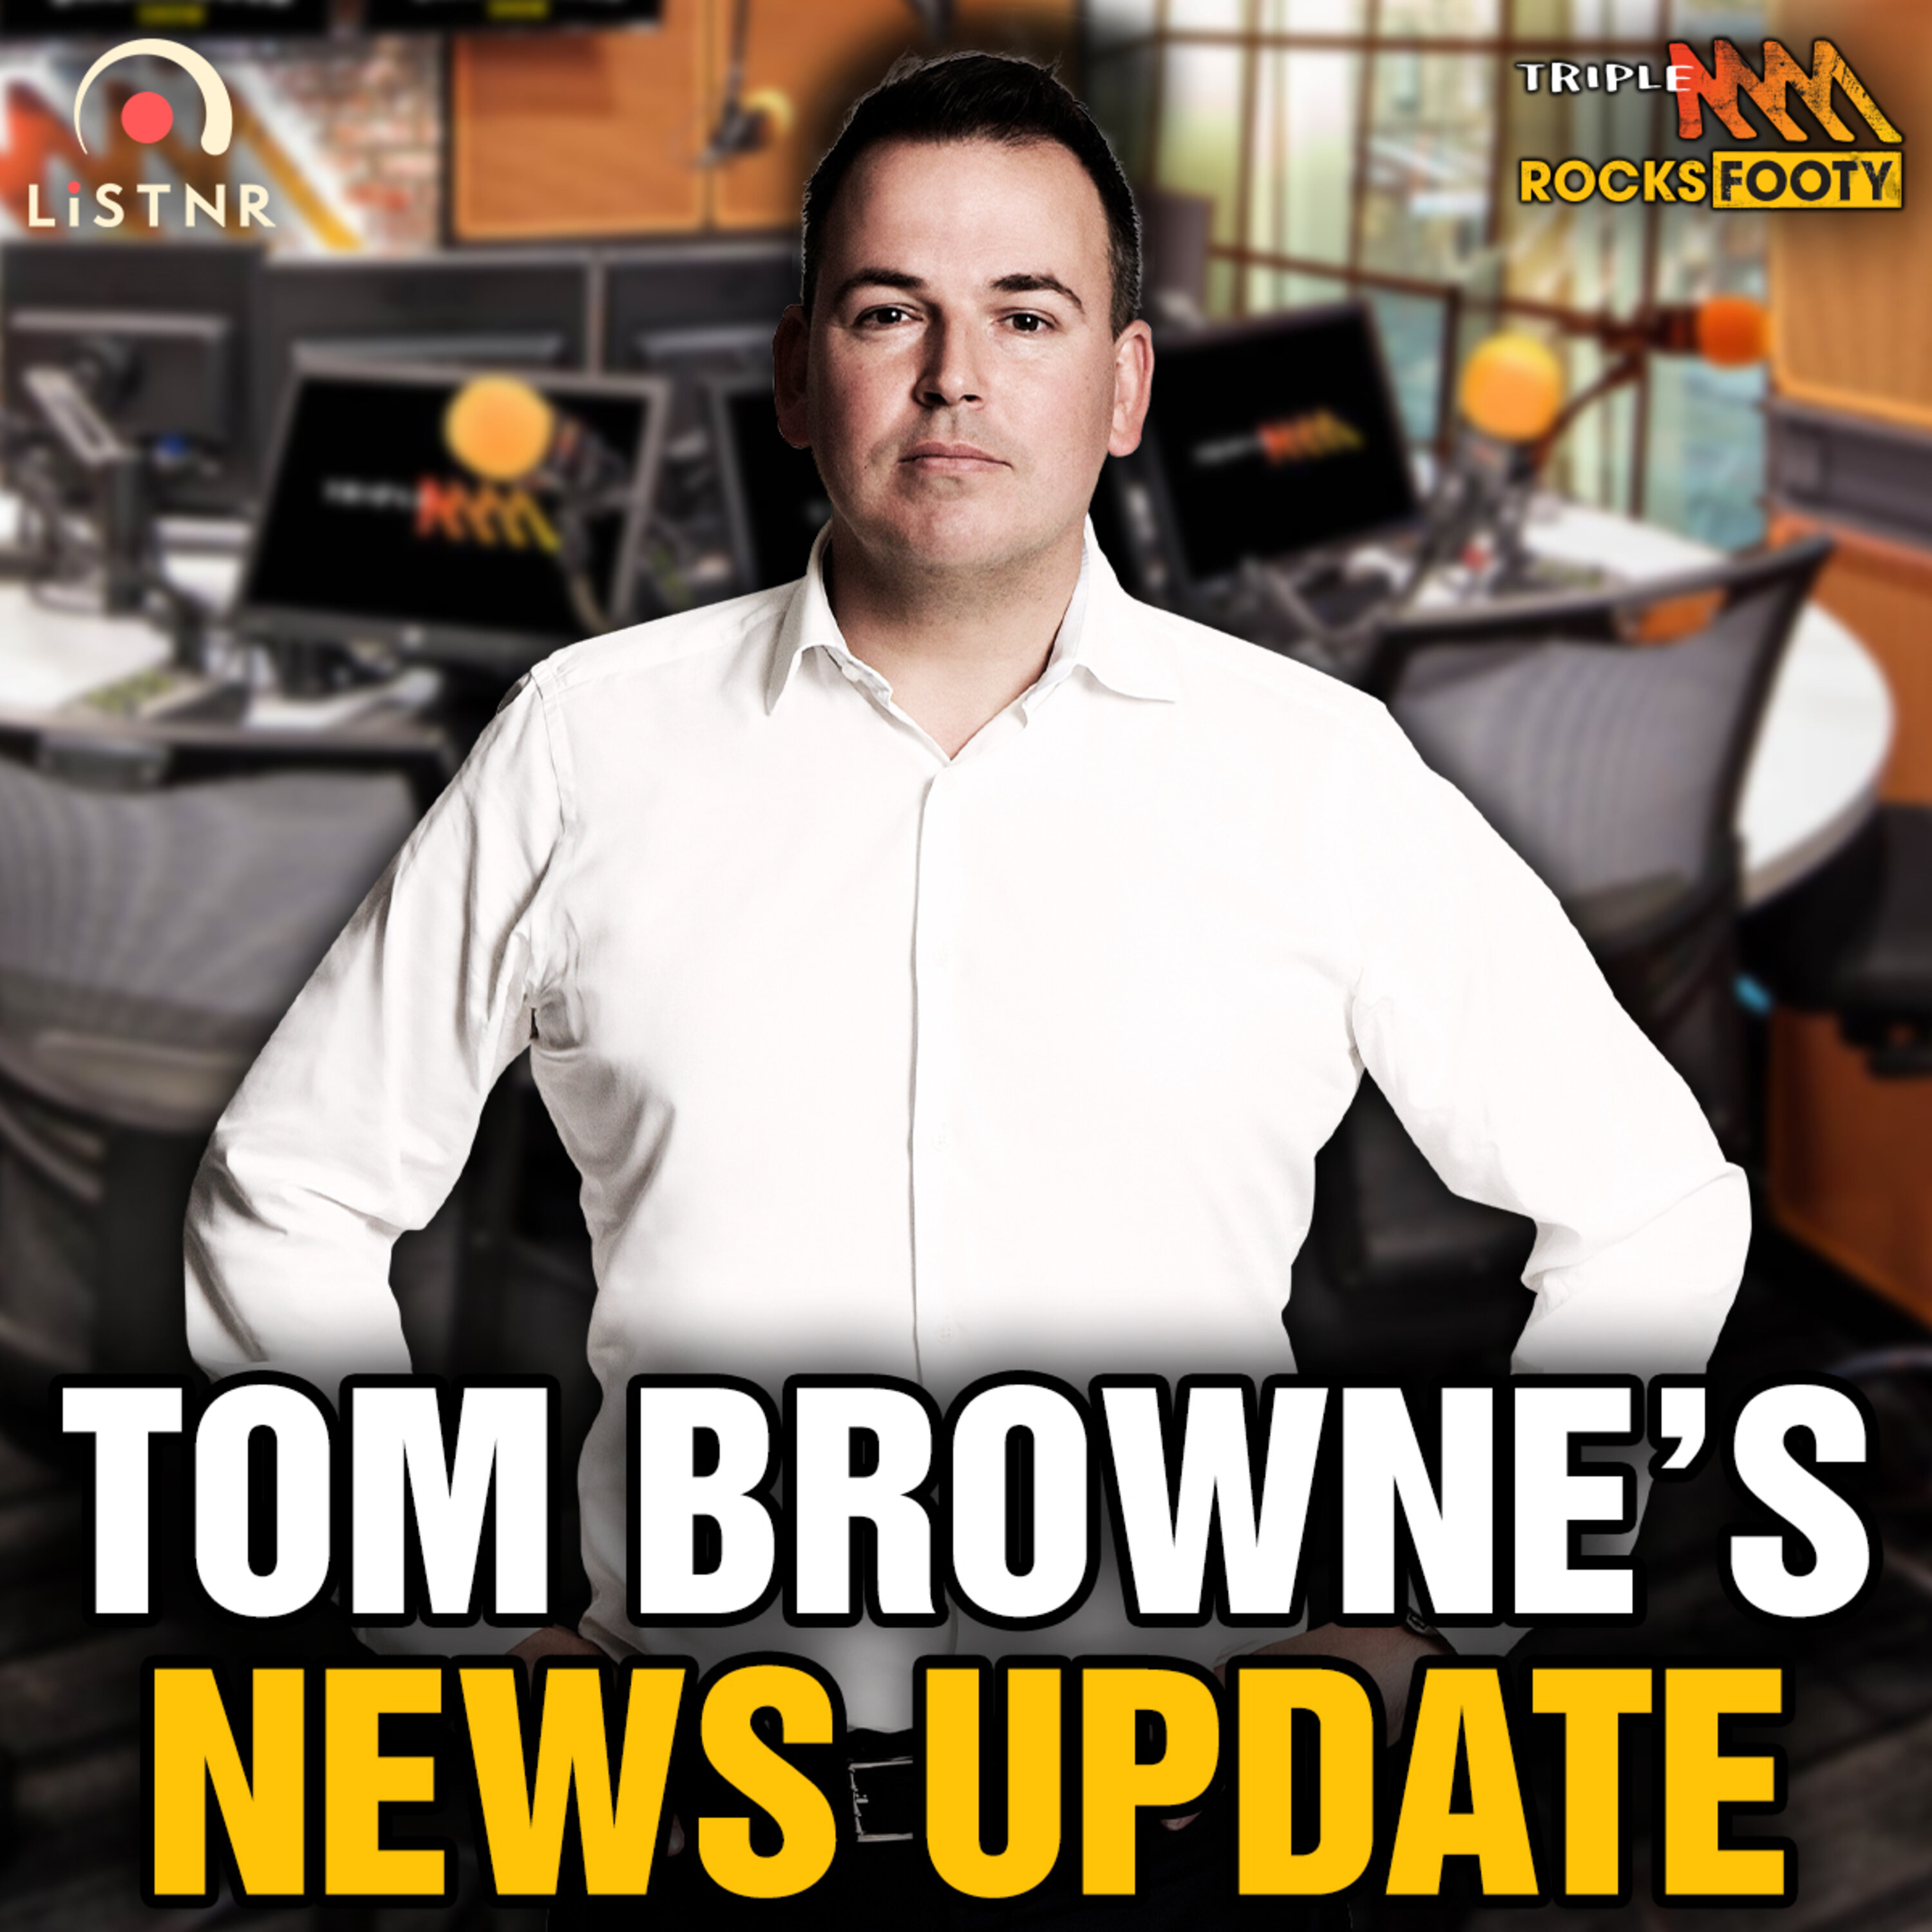 Tom Browne's News | More detail on the Clarko v Sam Mitchell grudge match, will Plugger go to St Kilda's 150th anniversary, grand final start time